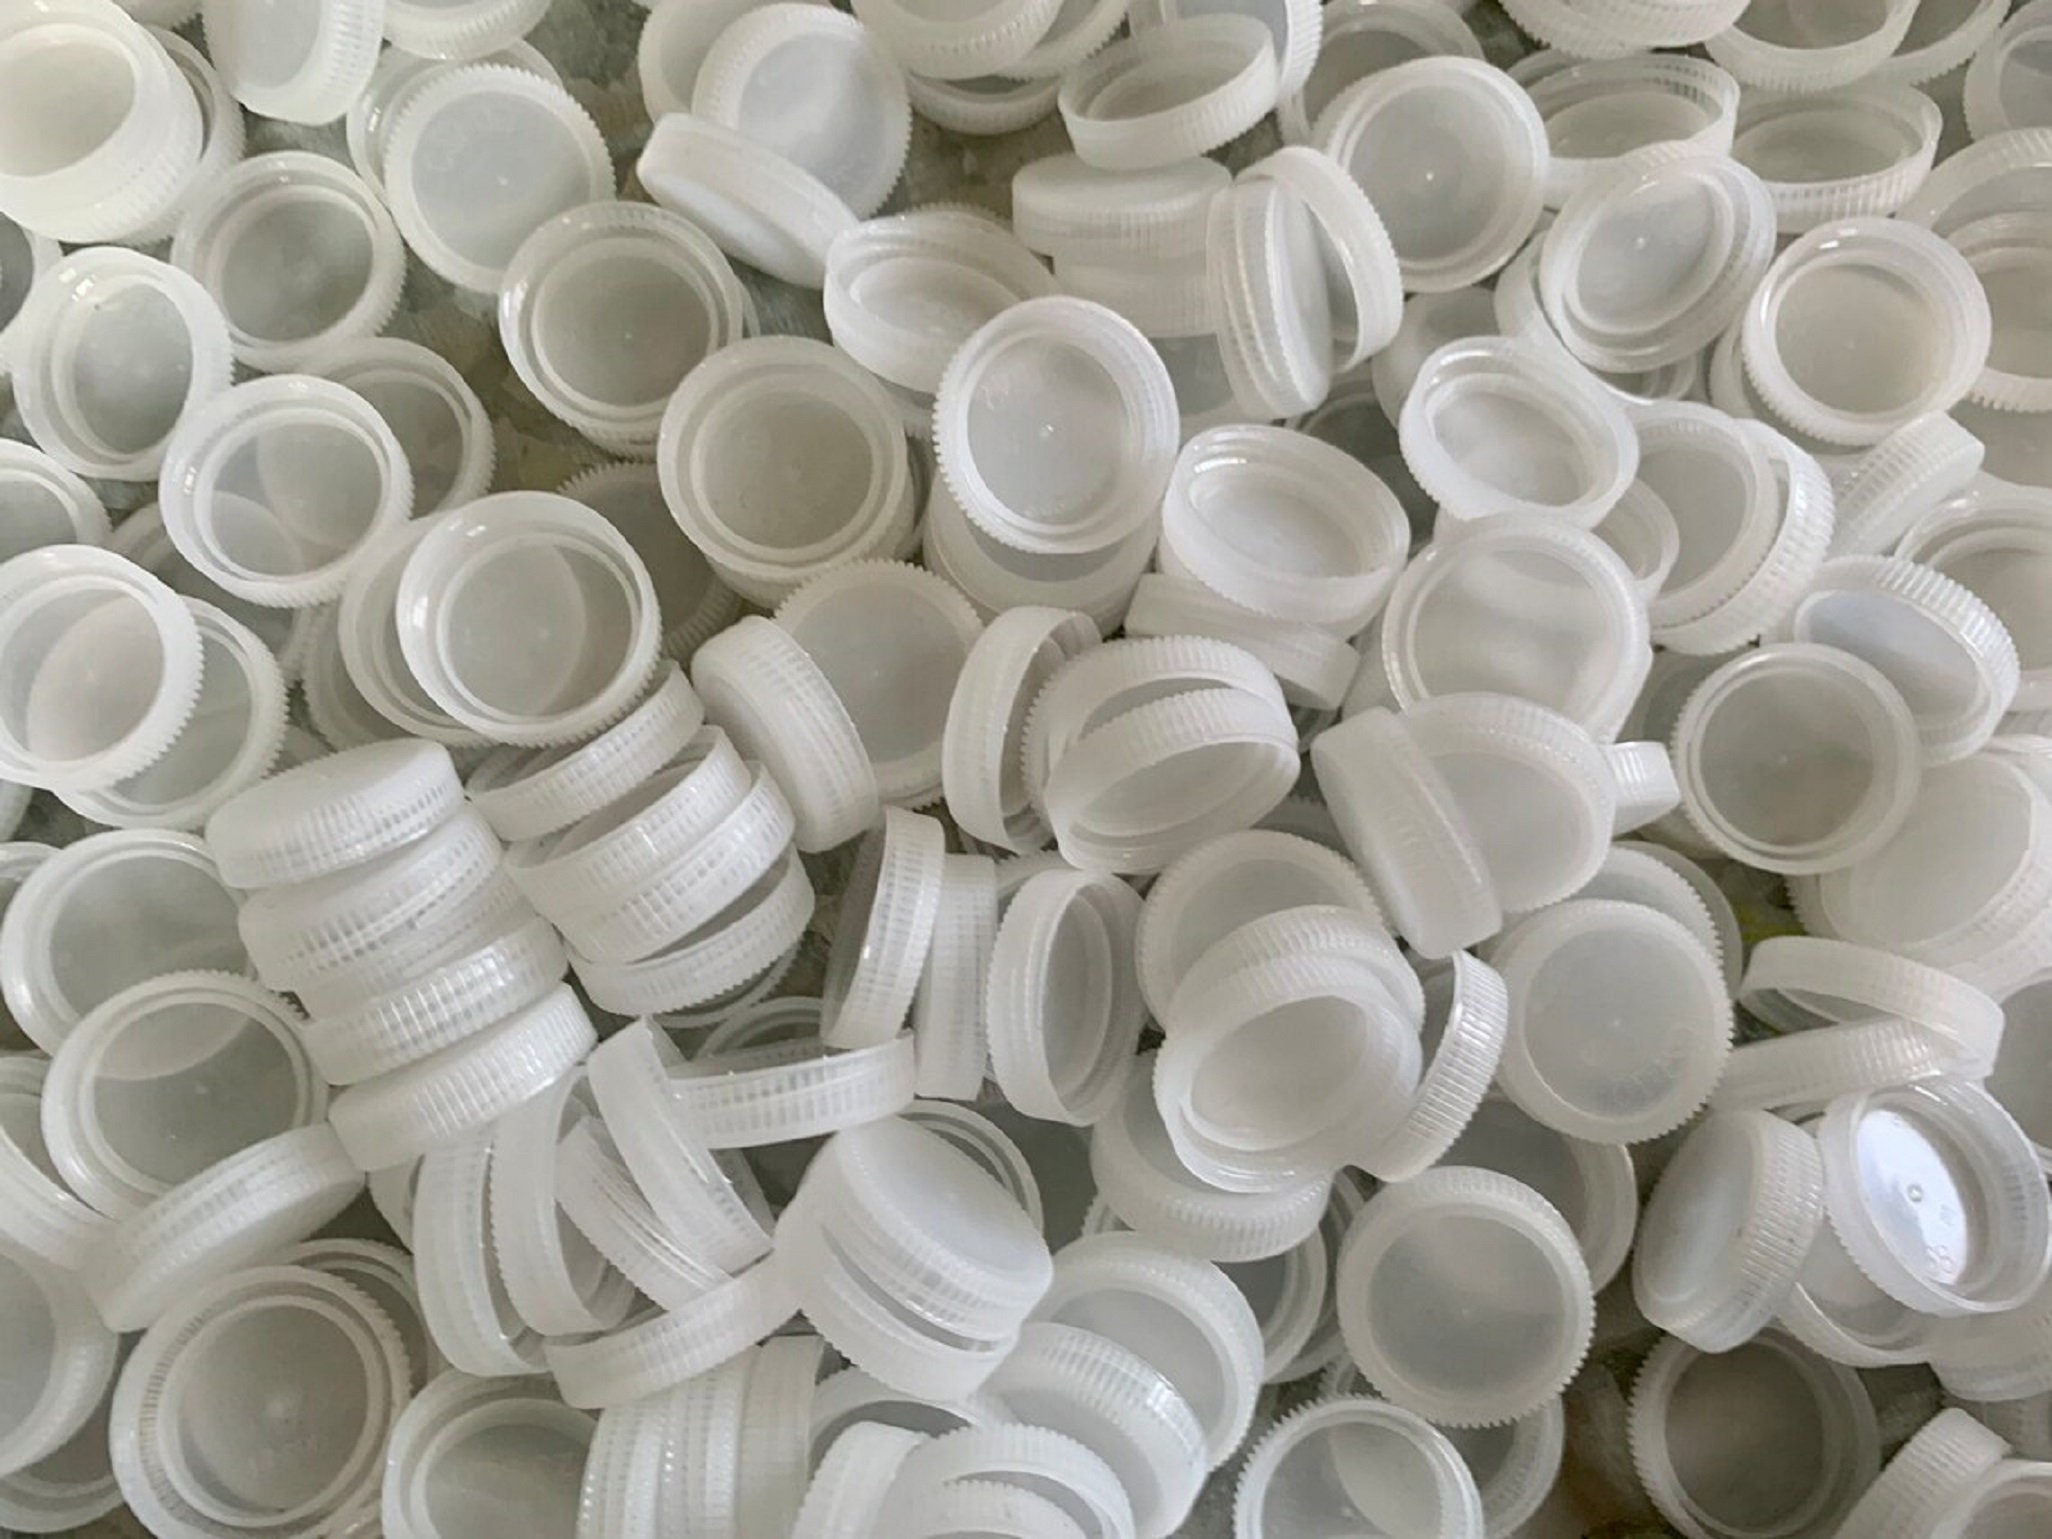  3 inch Clear Plastic Acrylic Craft Rings 5/16 inch Thick 12  Pieces : Arts, Crafts & Sewing